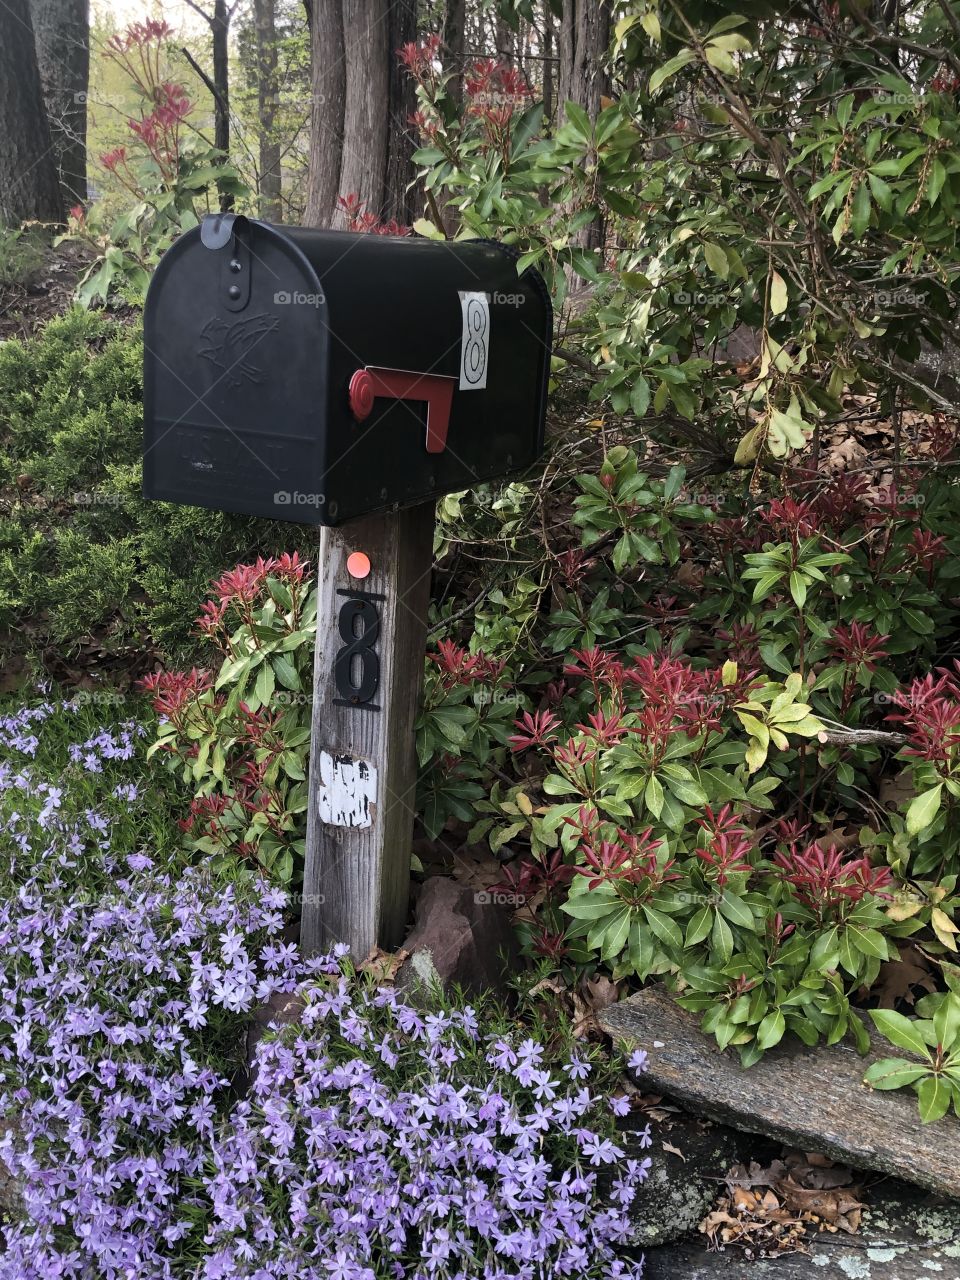 Mailbox surrounded by shrubs and lilac Creeping Phlox